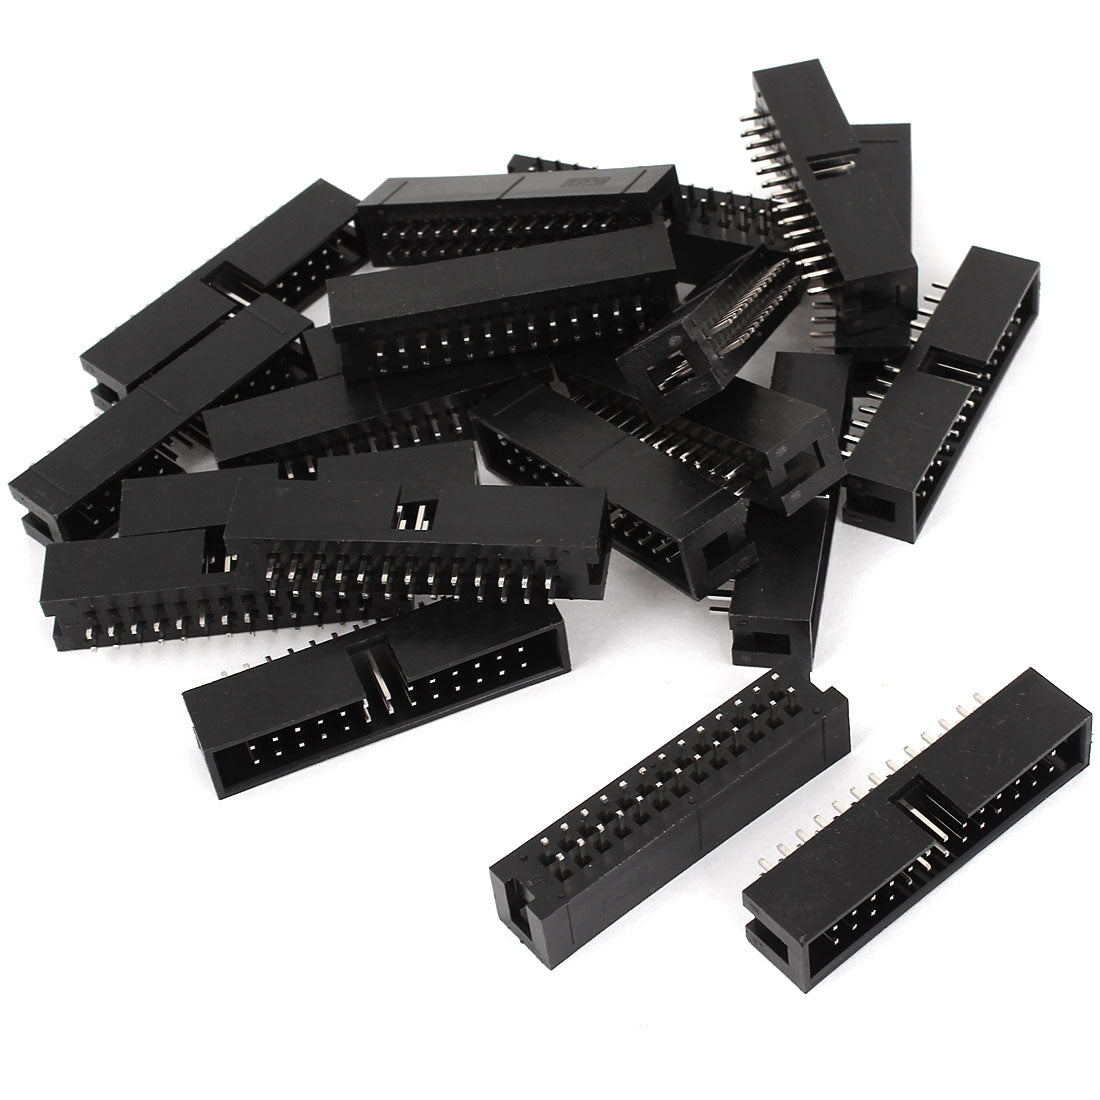 uxcell Uxcell 20pcs 2.54mm Pitch IDC Box Header DC3-26P 2 Row 26 Pins JTAG Connector